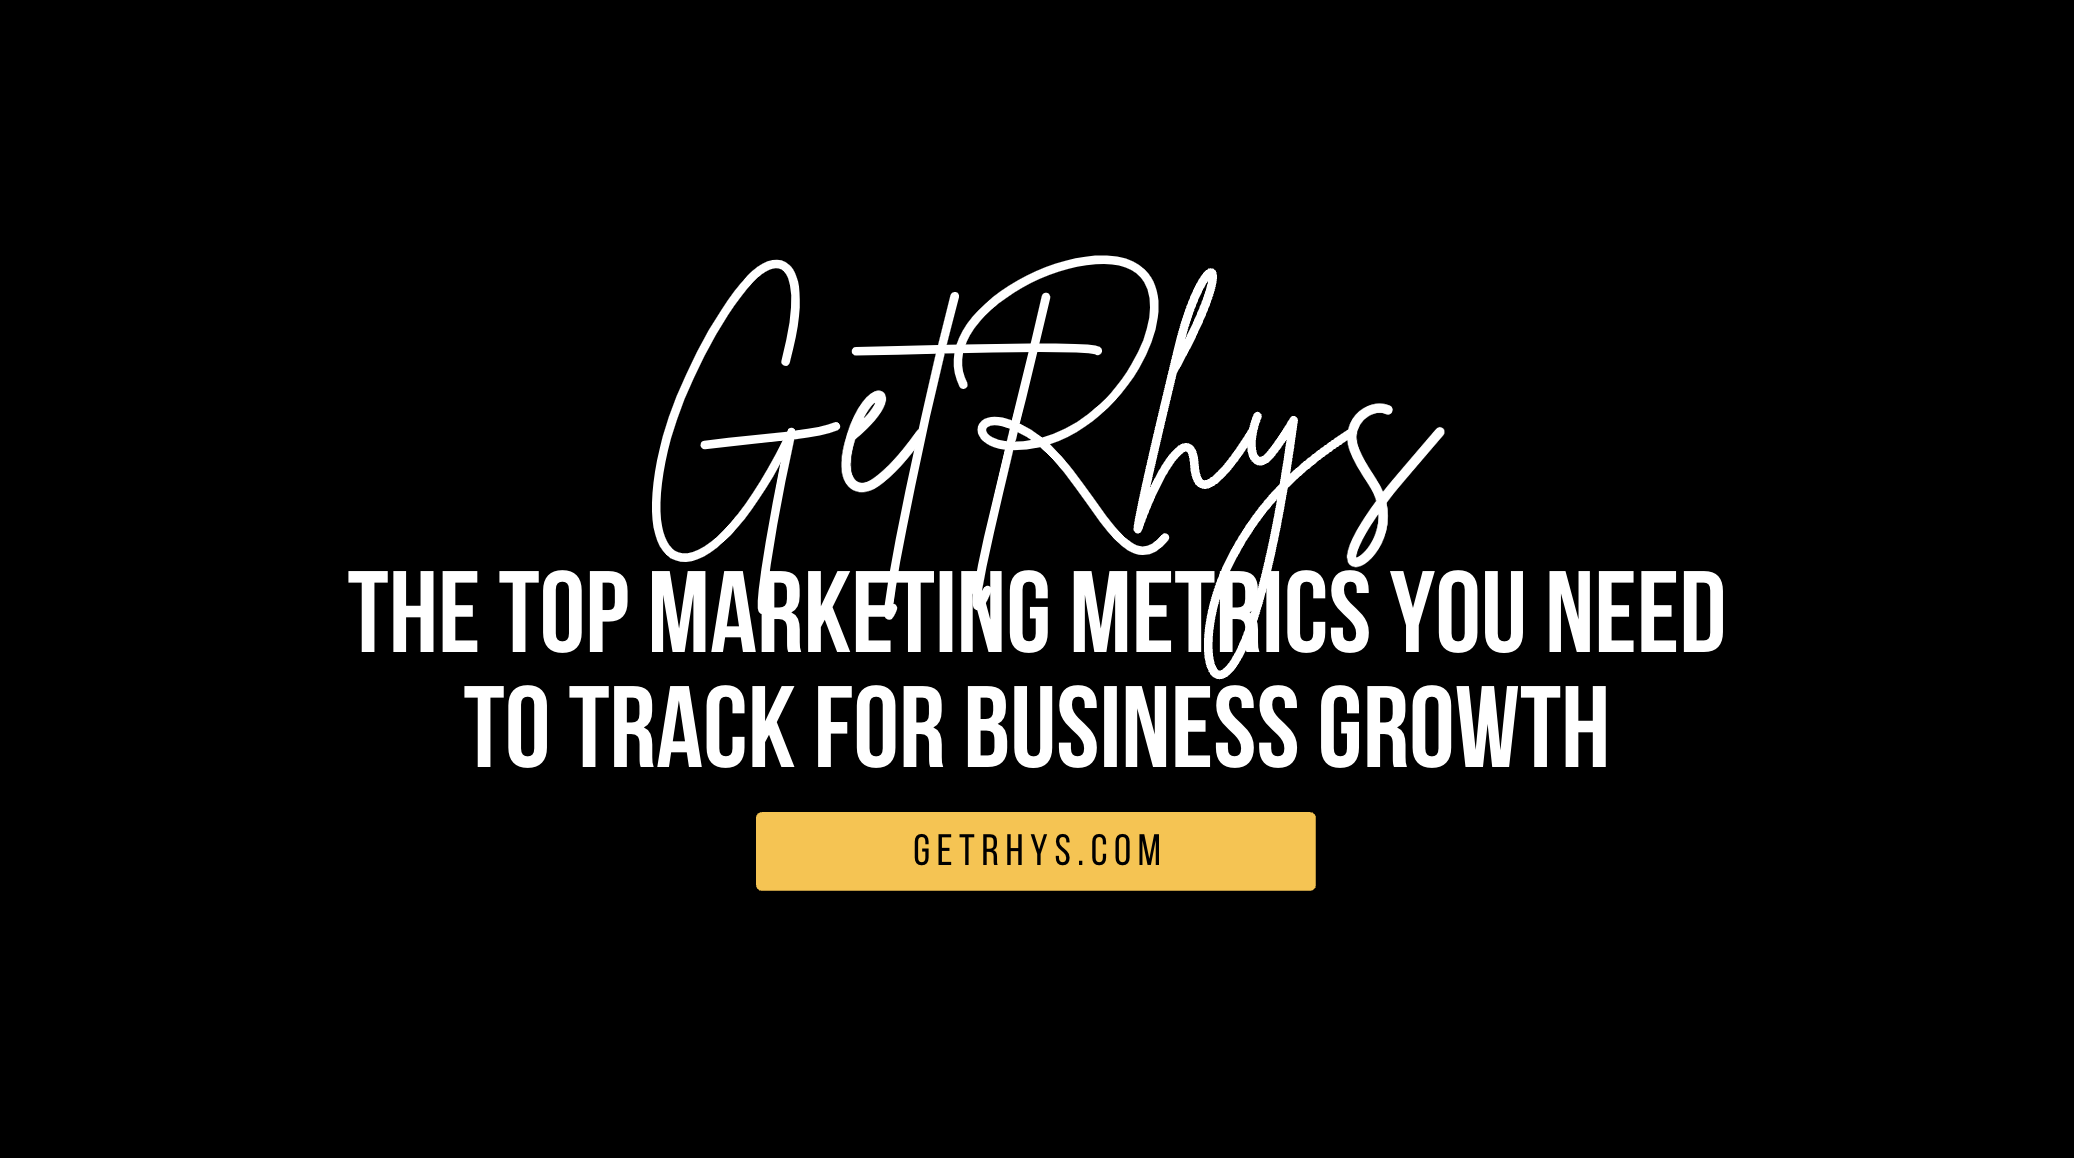 The Top Marketing Metrics You Need to Track for Business Growth